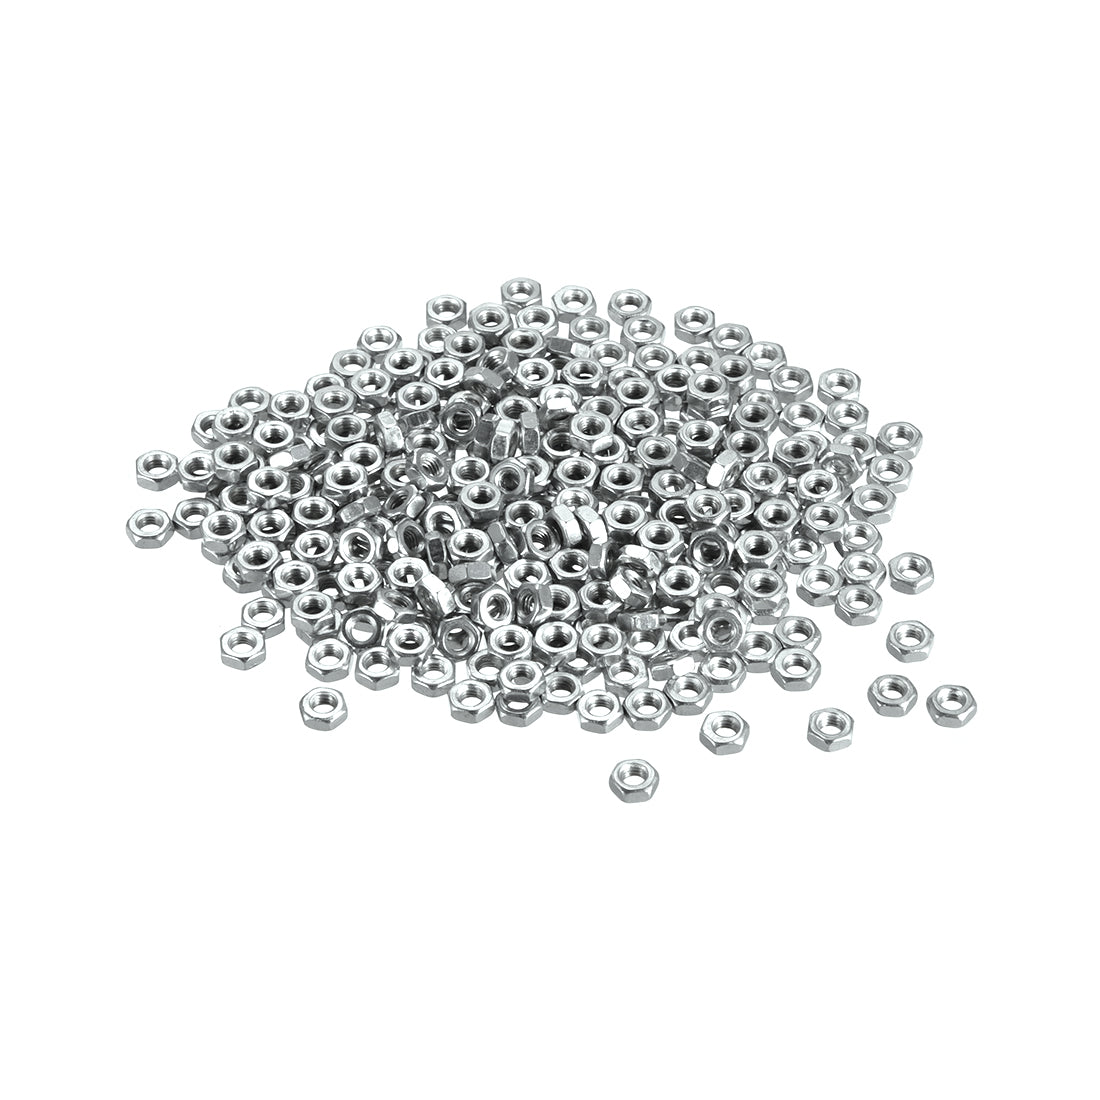 uxcell Uxcell M3 Metric Carbon Steel Hexagon Hex Nut Silver Tone 300pcs